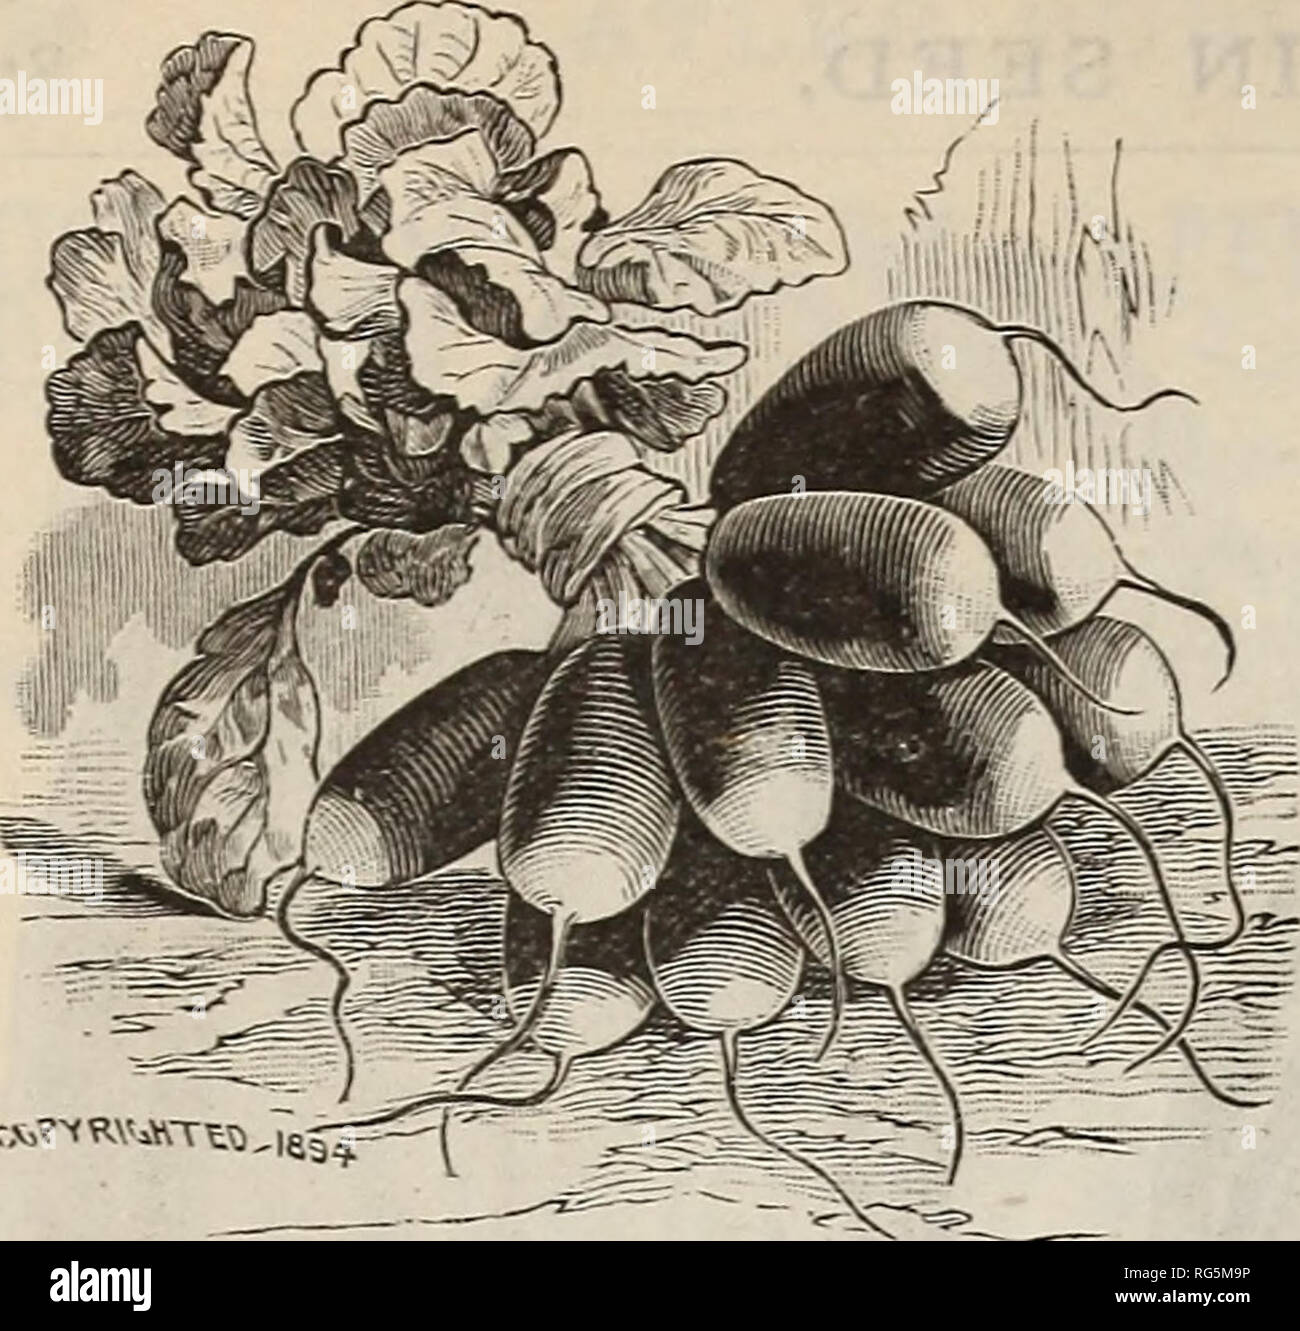 . Burpee's farm annual. Nursery stock Pennsylvania Philadelphia Catalogs; Flowers Catalogs; Vegetables Catalogs; Seeds Catalogs; W. Atlee Burpee Company; Nursery stock; Flowers; Vegetables; Seeds. RADISH SEED. Our prices are for Seed postpaid by mail; if ordered by ex- press, at expense of the purchaser, deduct 8 cts. per pound from prices quoted. Plant frequently for succession. NEW BRIGHT BREAKFAST RADISH. An Improved Type of the French Breakfast. Gardeners generally know what an improvement the Early Round Dark Red Radish is over the old Early Scarlet Turnip, also the Early Oval Dark Red ov Stock Photo